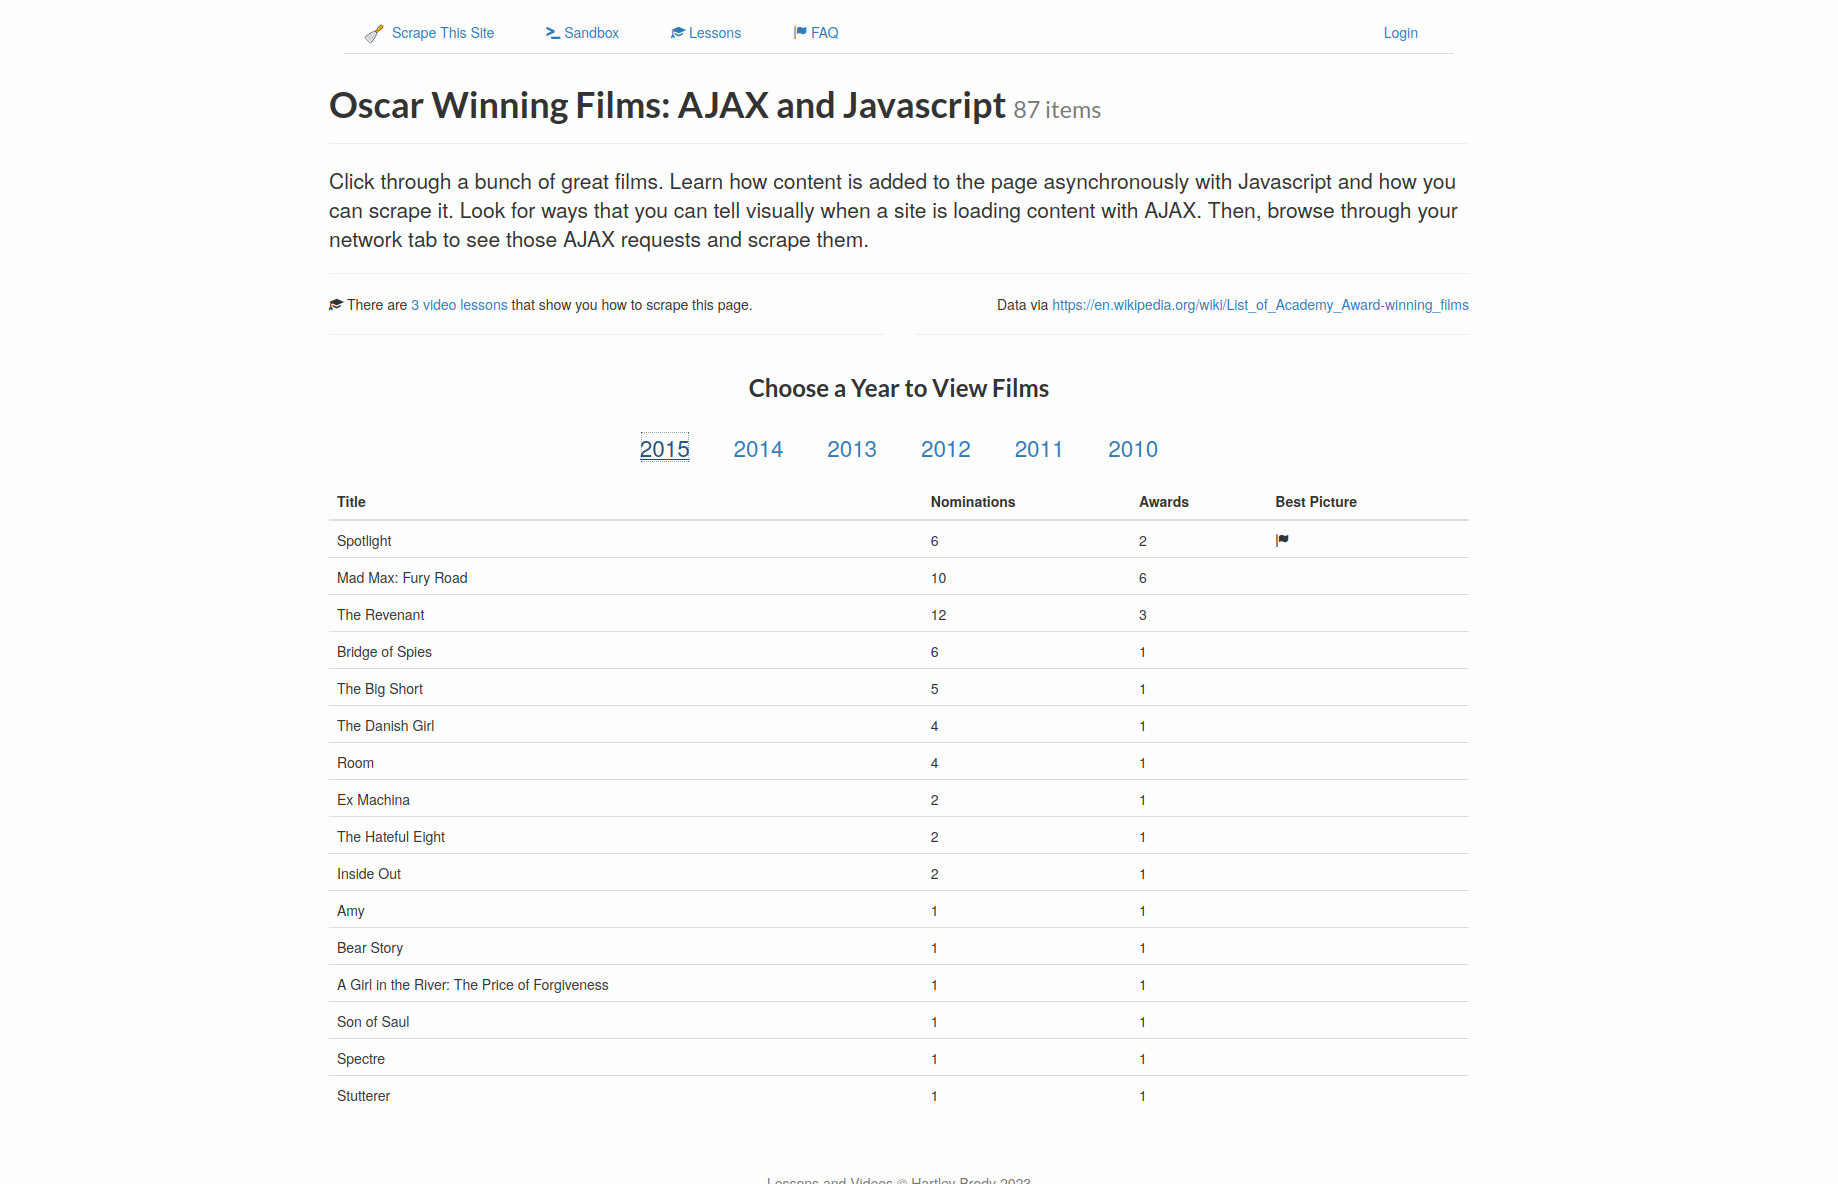 Website with list of Oscar-winning movies for 2015